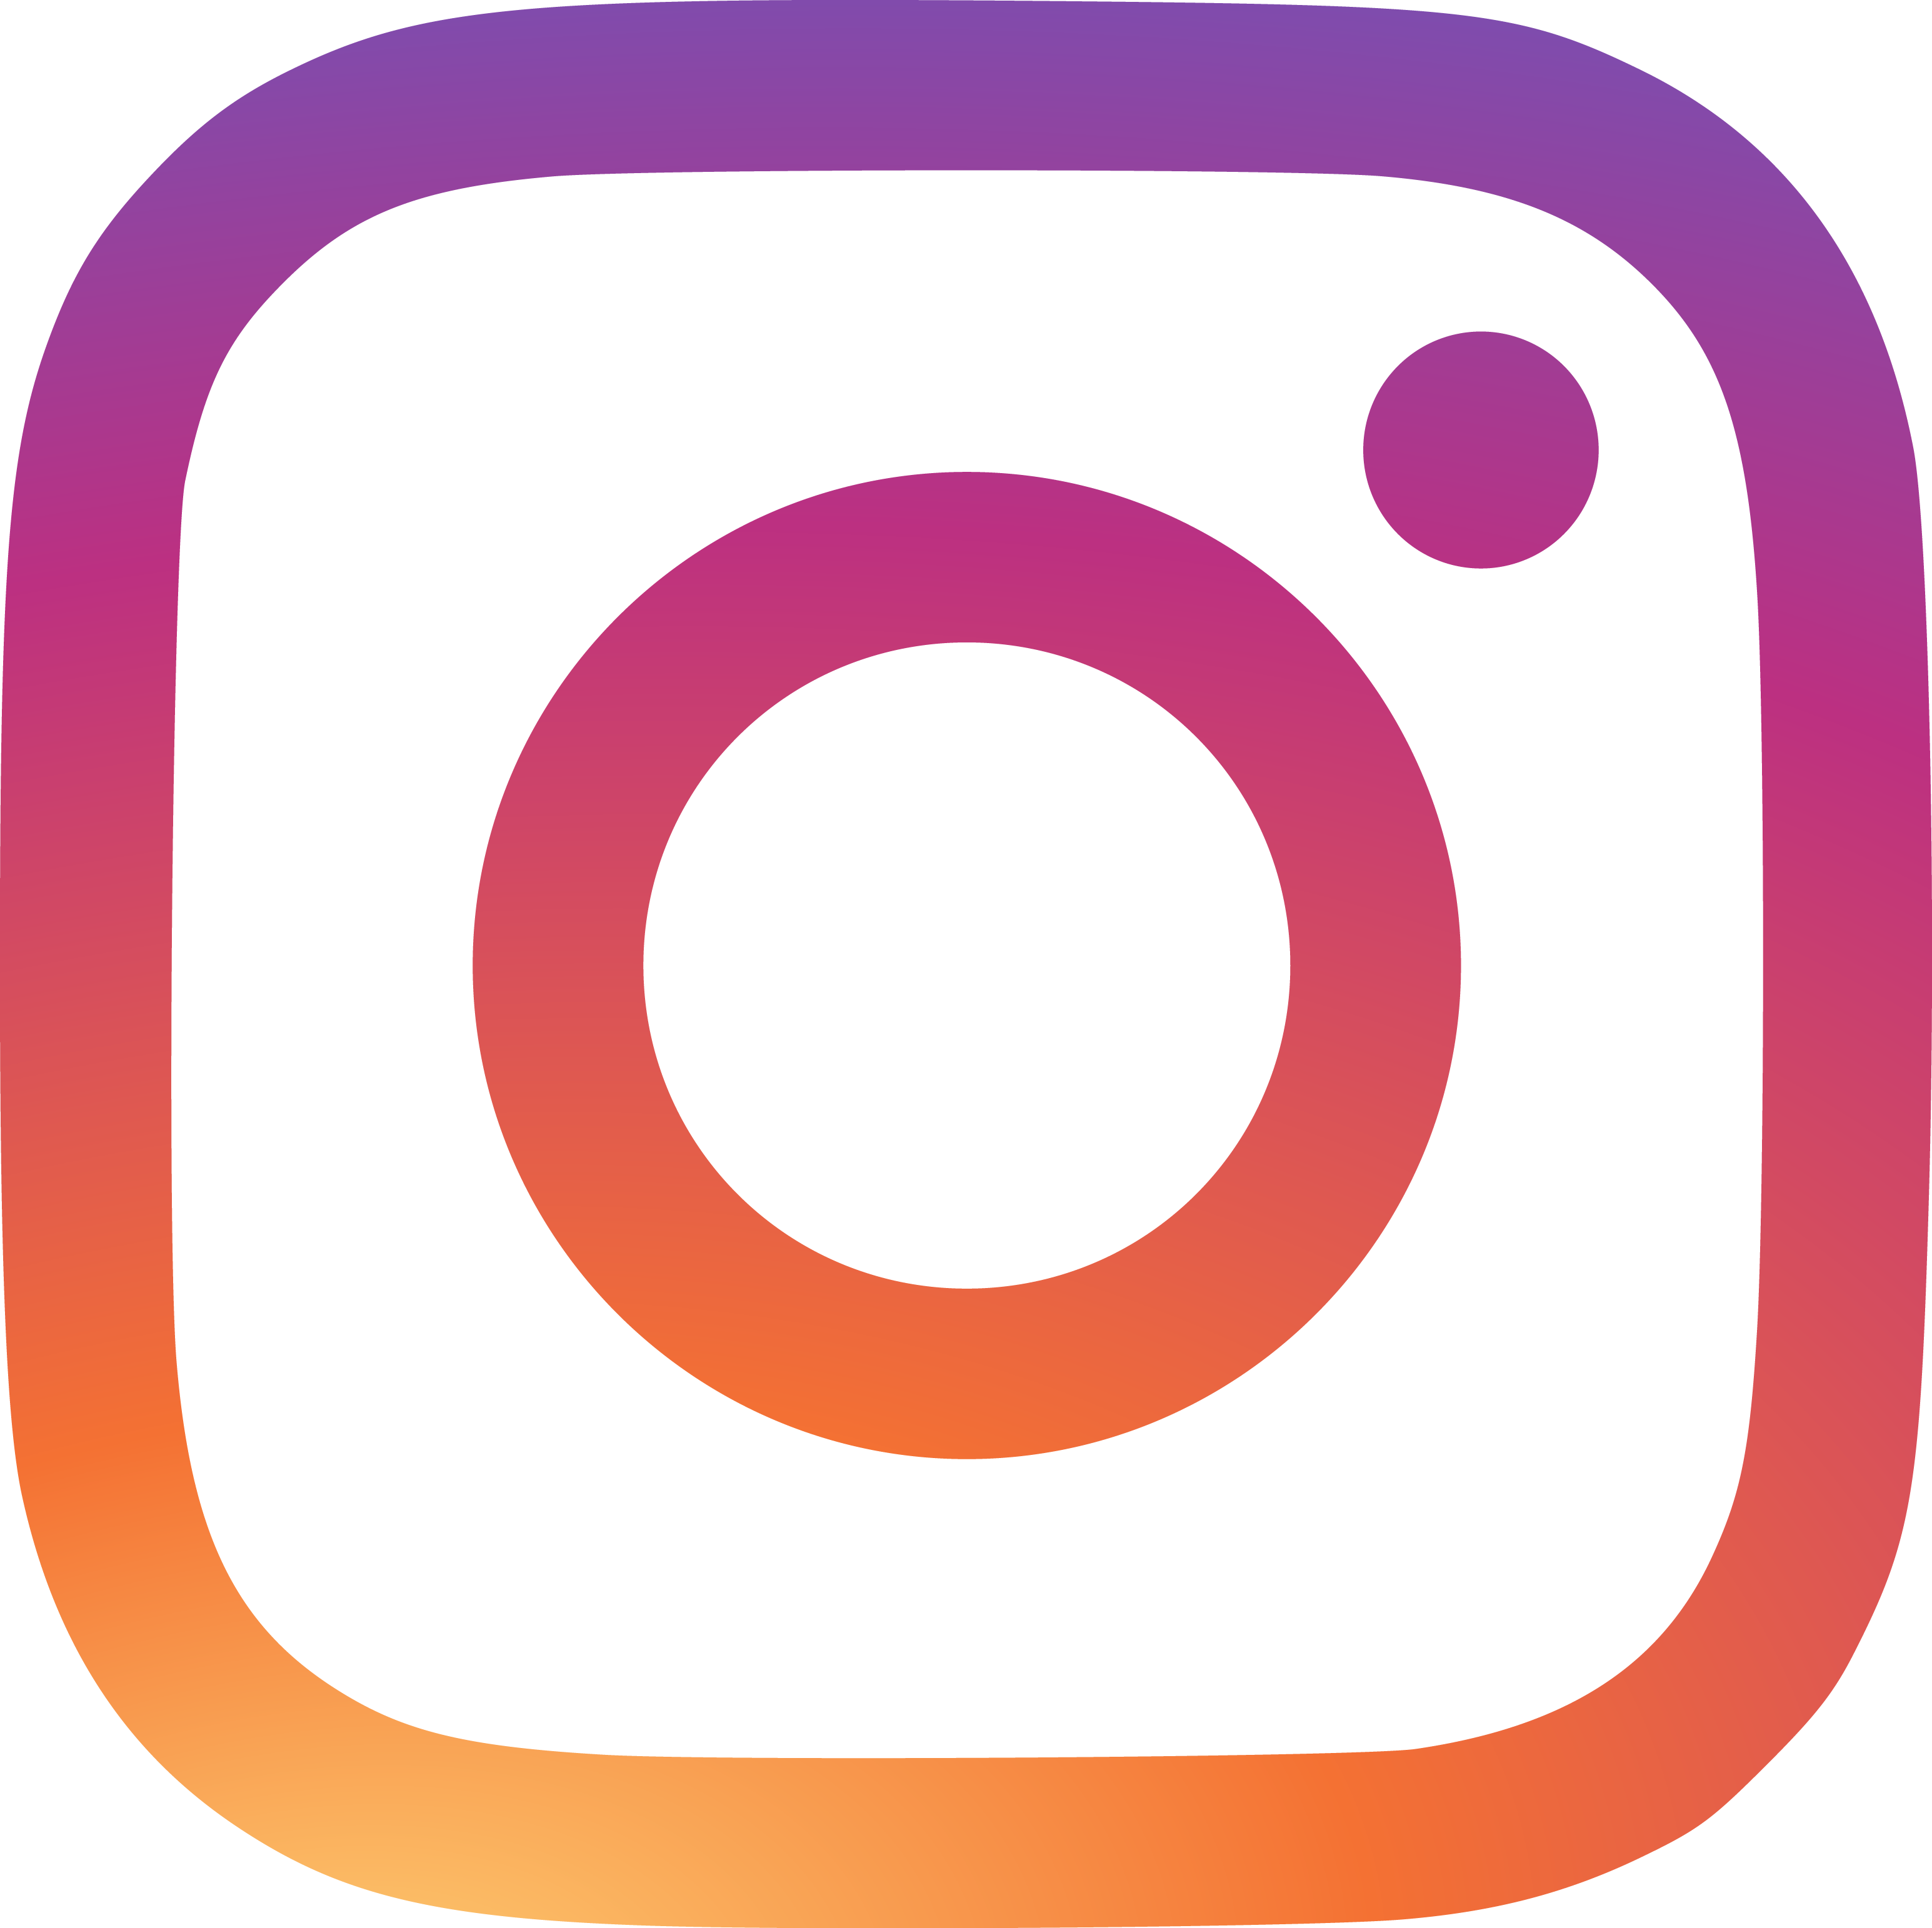 Instagram Logo [New] Vector EPS Free Download, Logo, Icons.